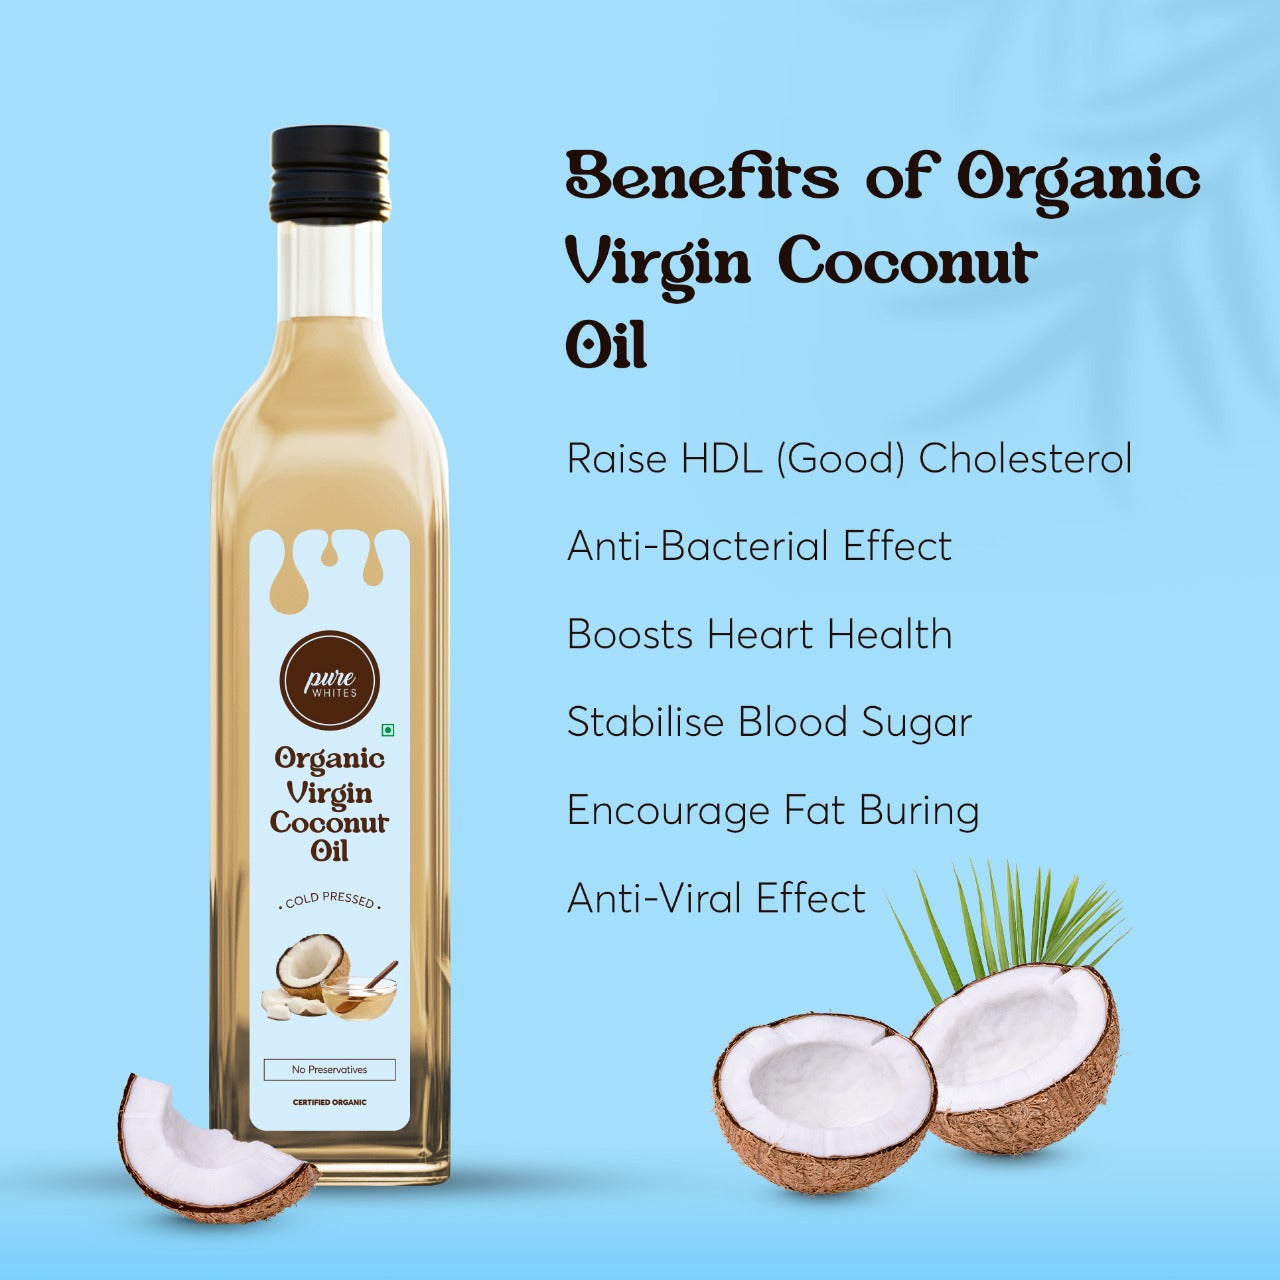 Cold Pressed Virgin Coconut Oil (Certified Organic)